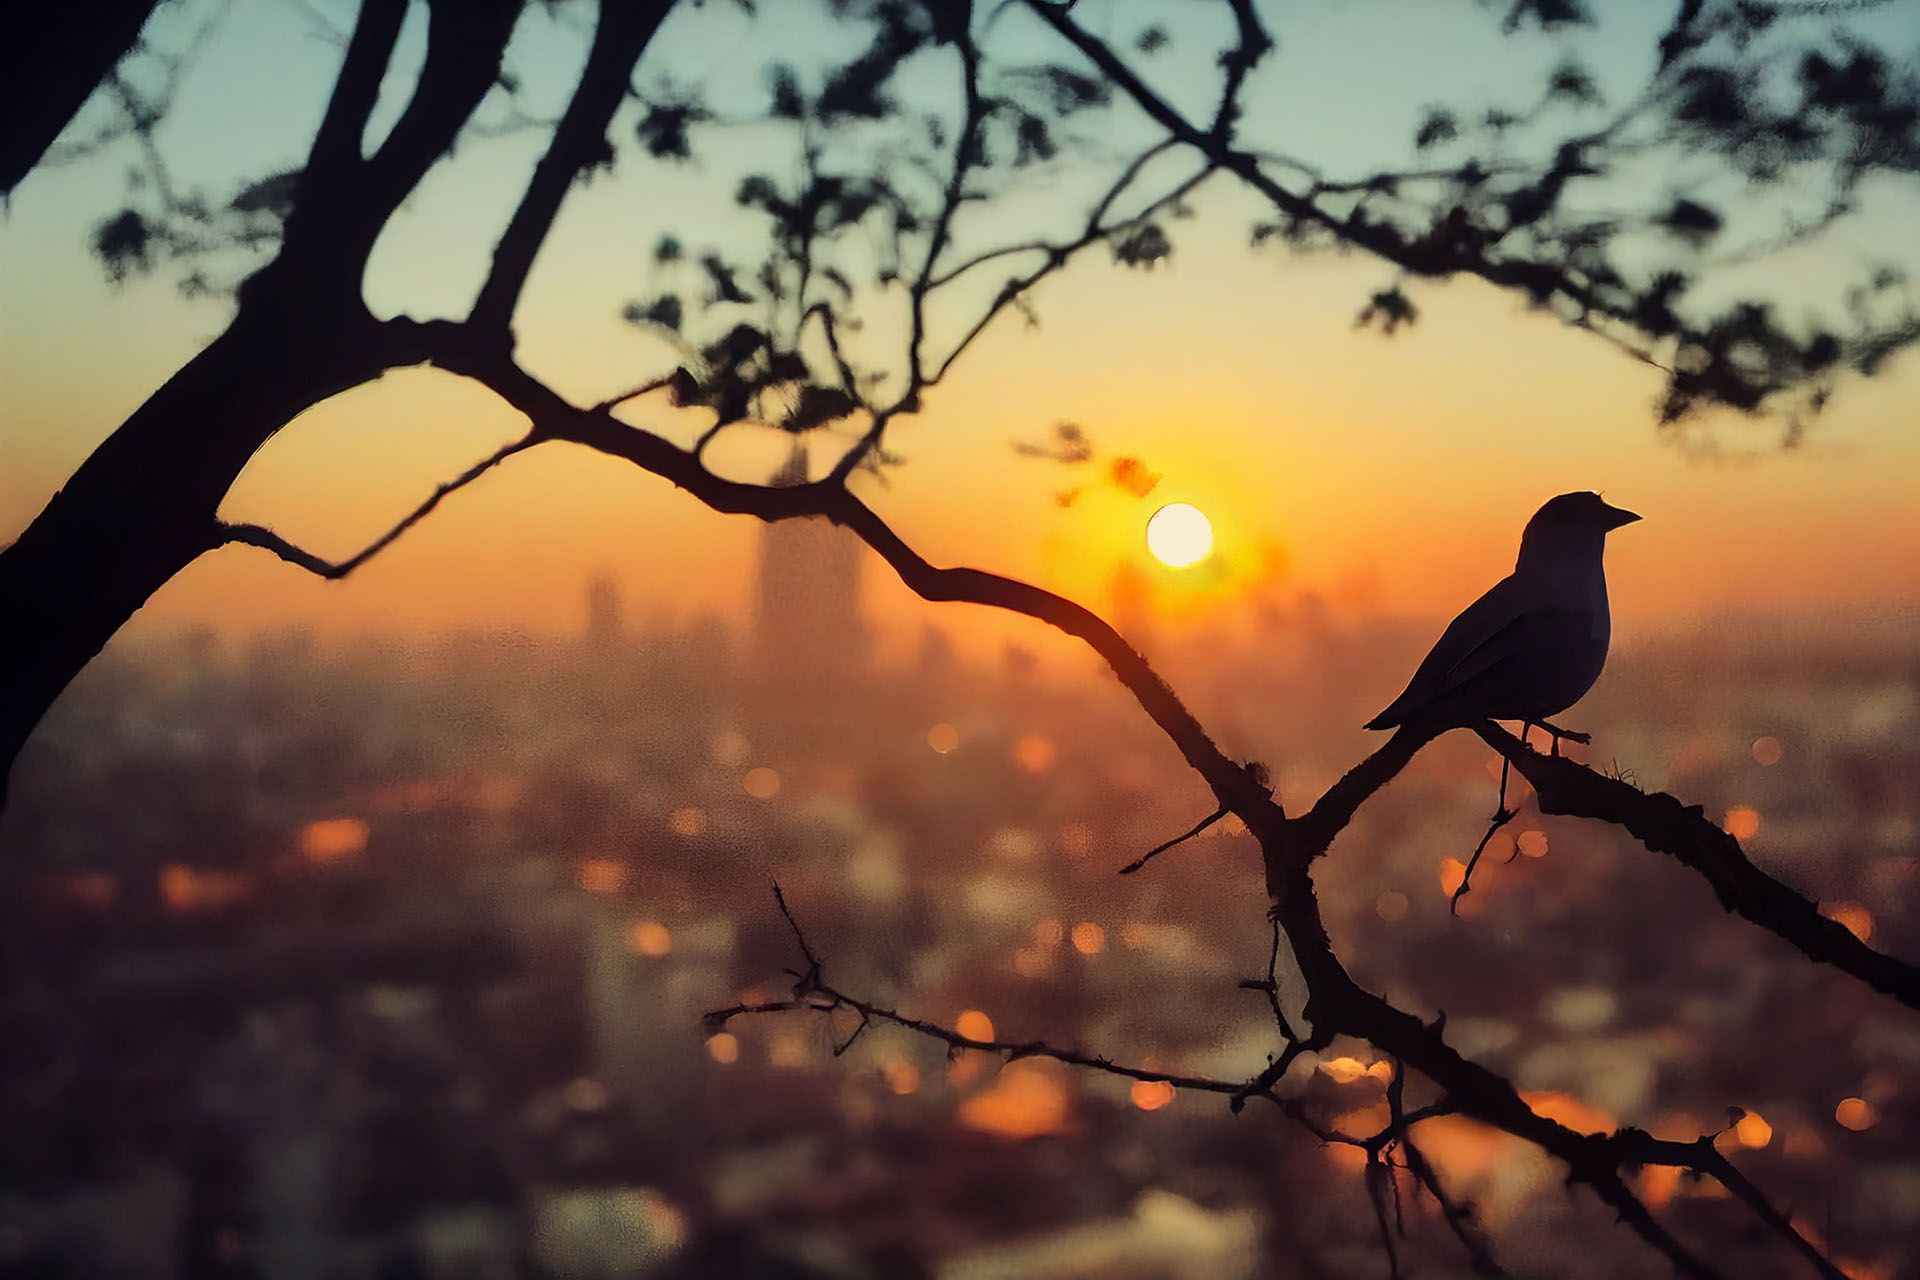 a bird in a tree with a city bathed in morning sun behind